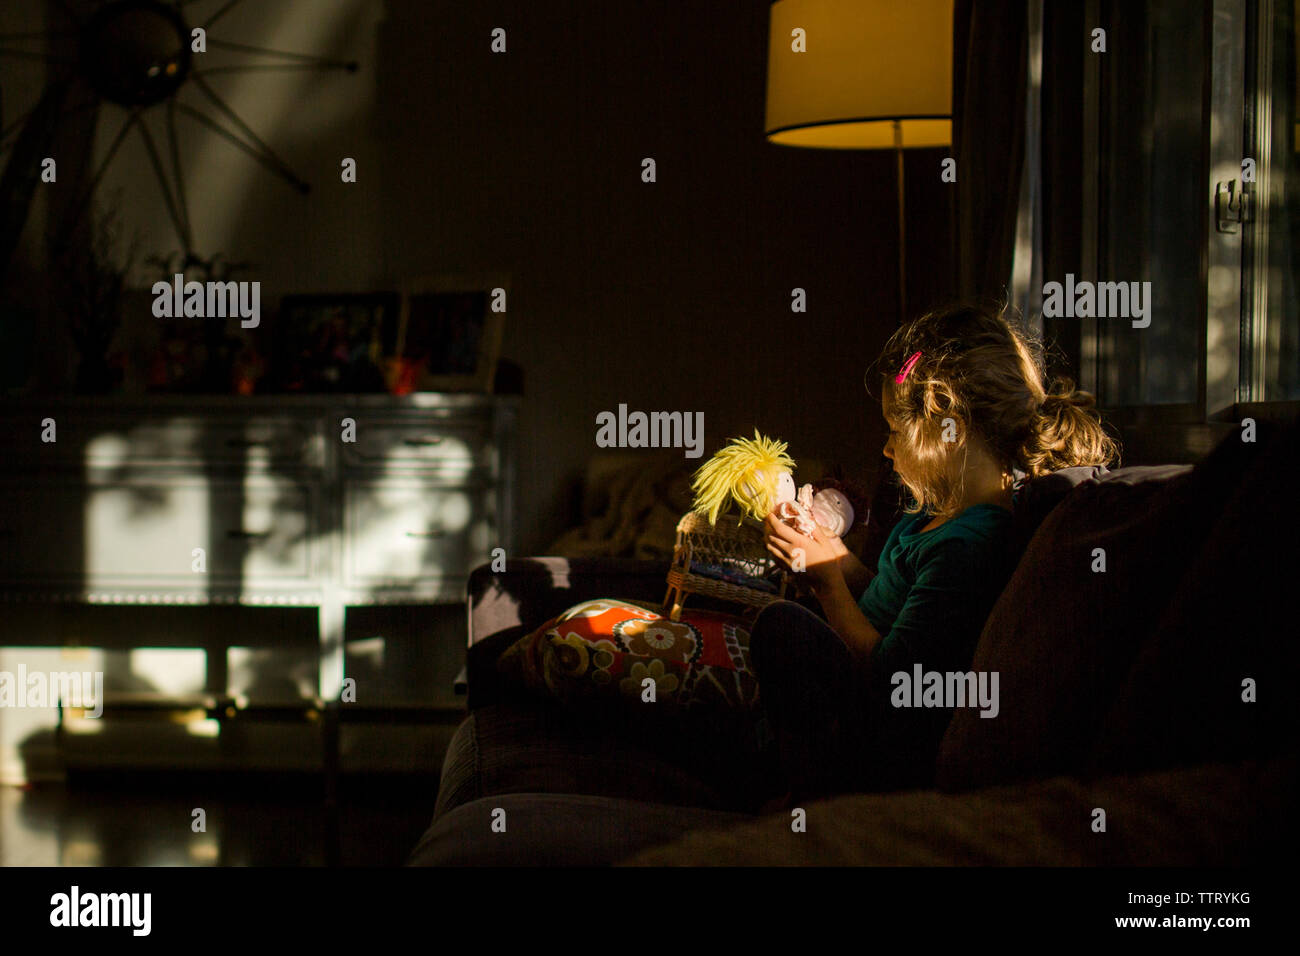 a little girl sits in a patch of light in a dark room holding a doll Stock Photo